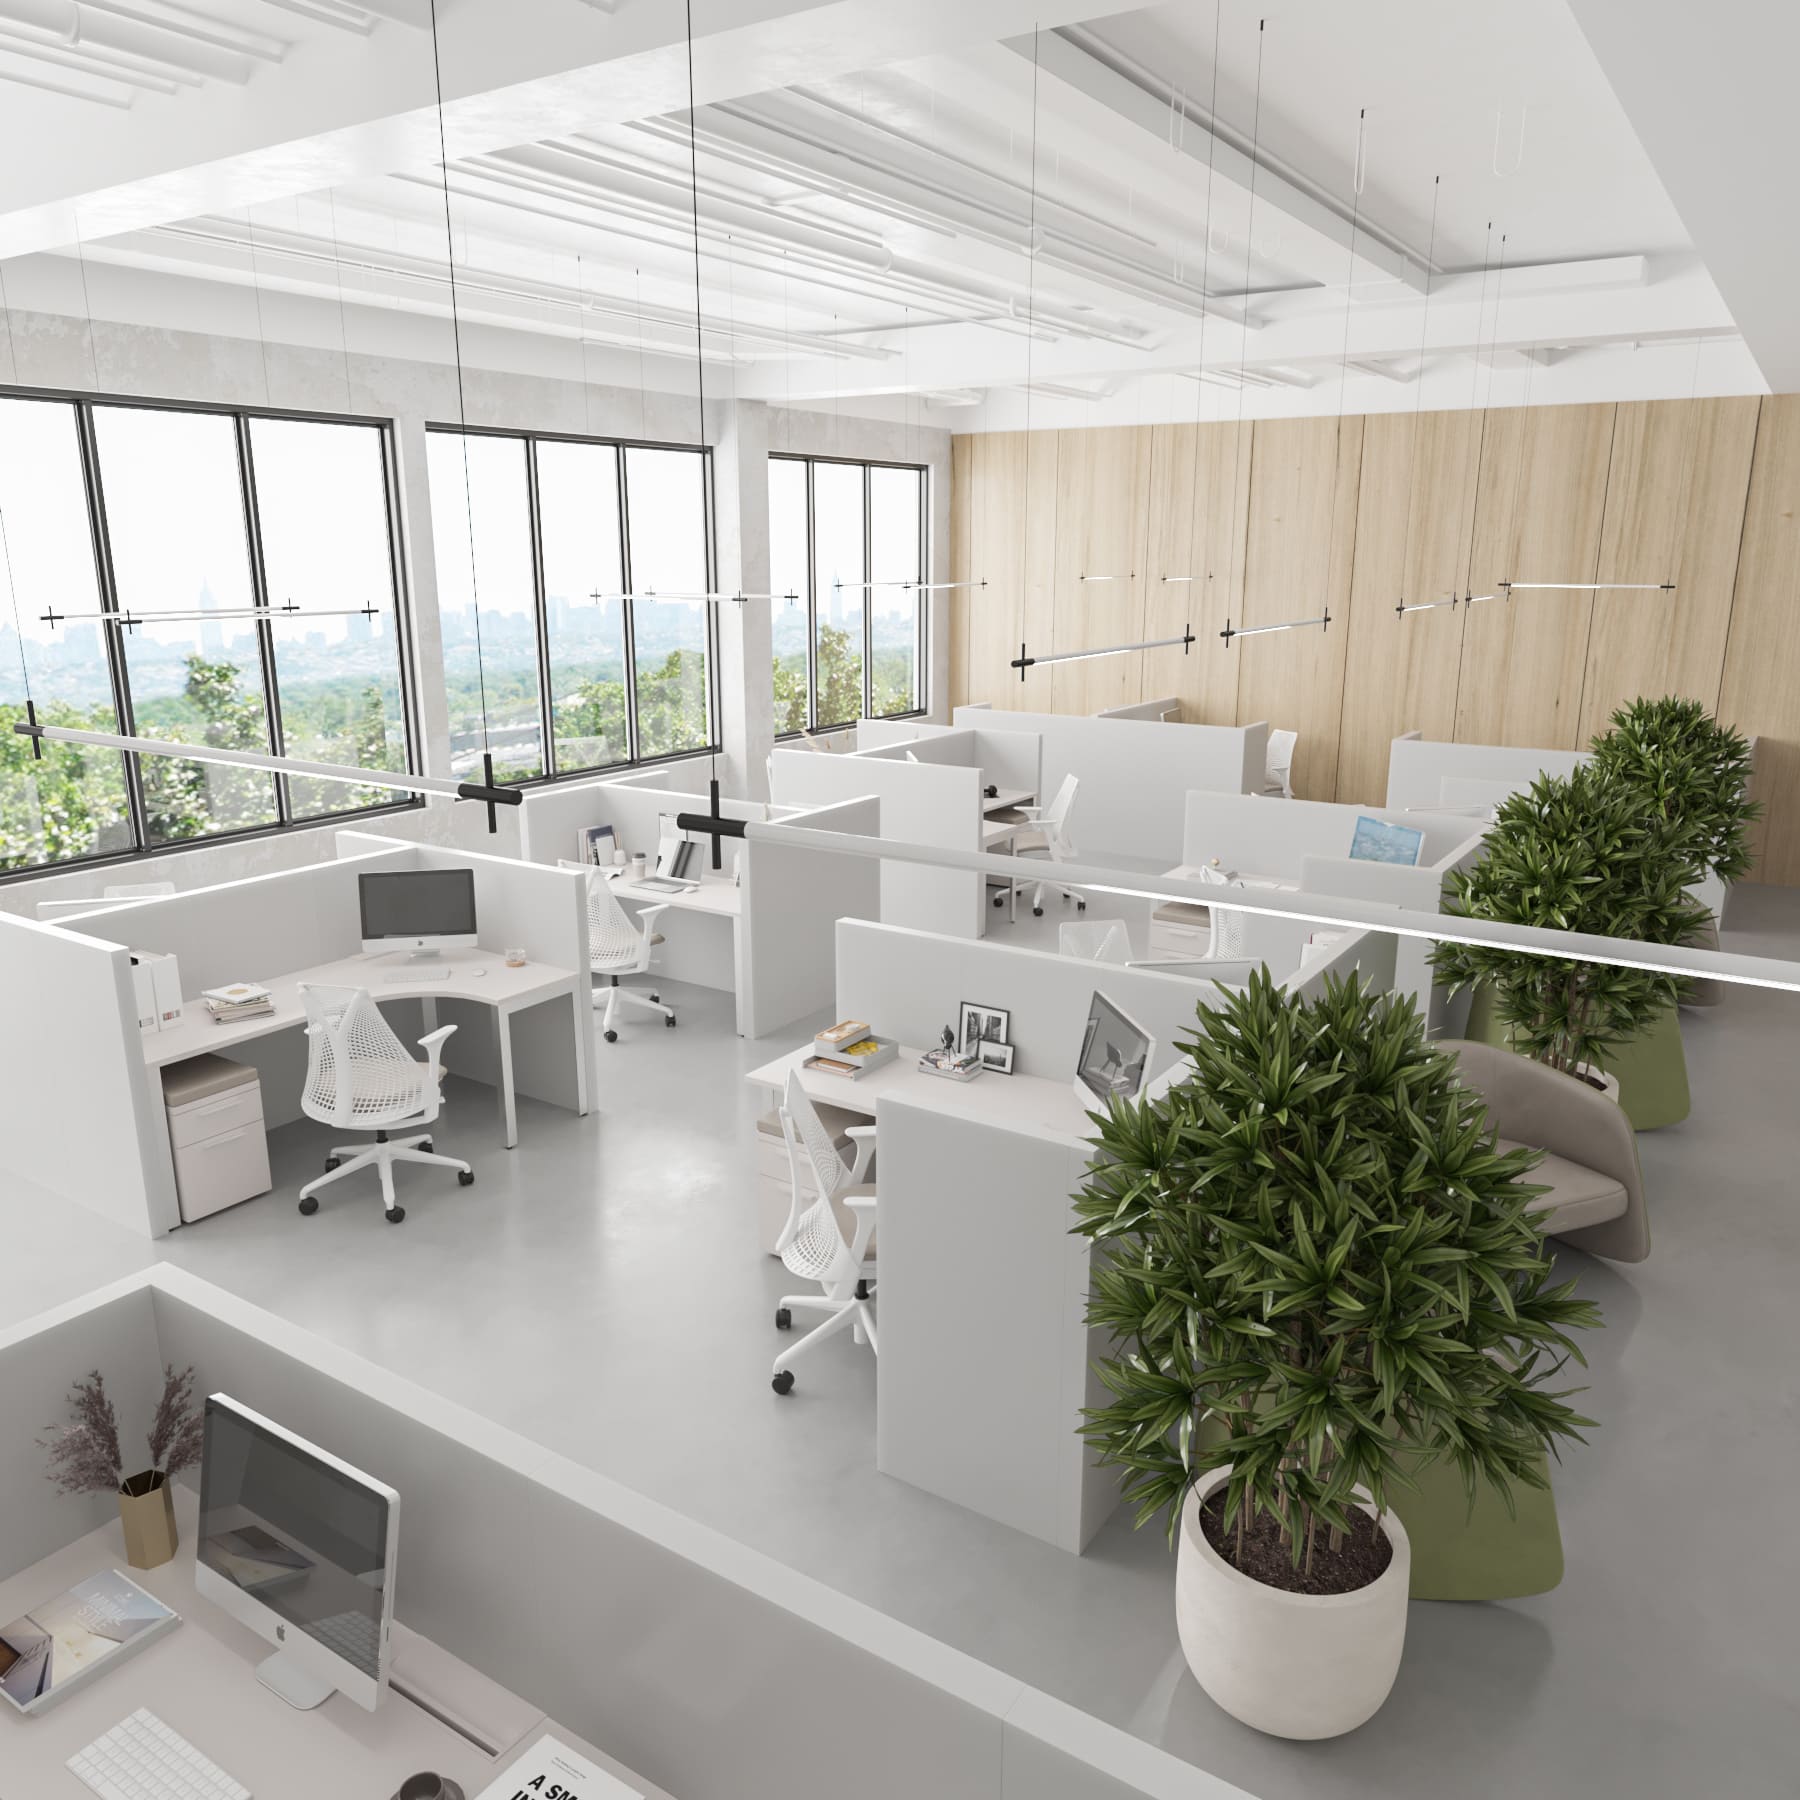 5 Tips to Make Your Open Office a Collaborative Space – Diyversify